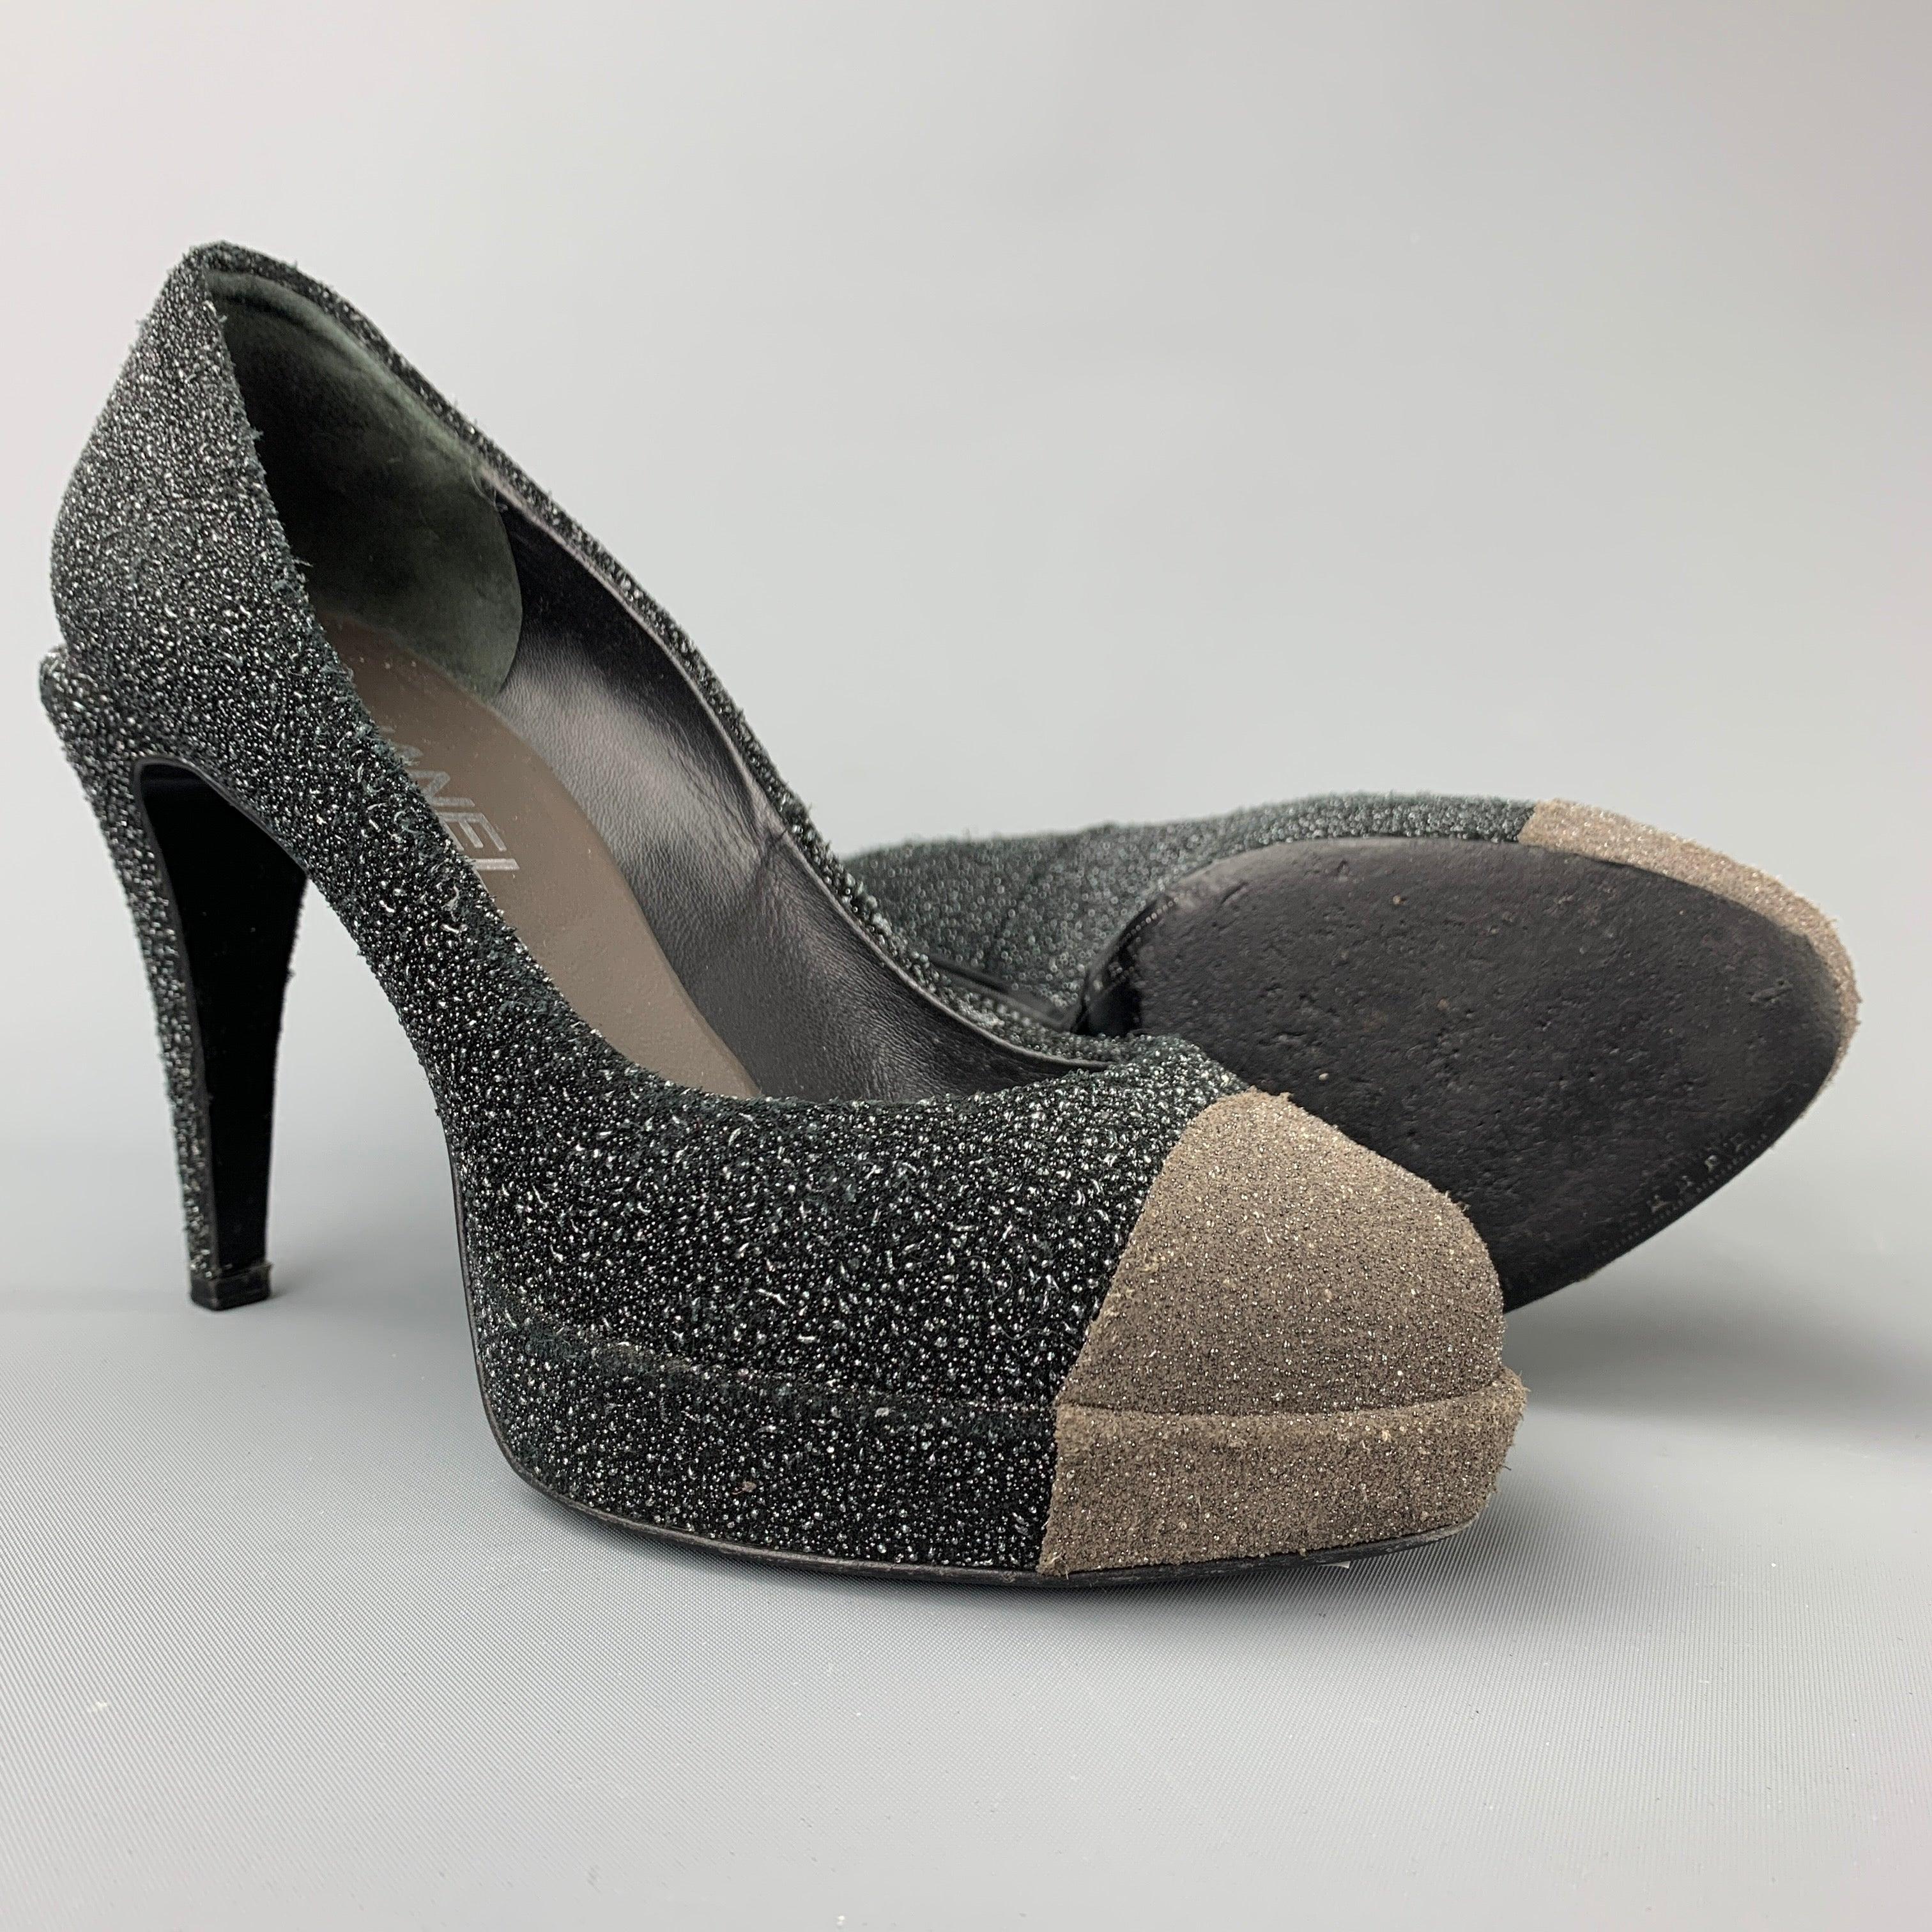 CHANEL Size 7 Charcoal & Grey Sparkle Textured Pumps In Good Condition For Sale In San Francisco, CA